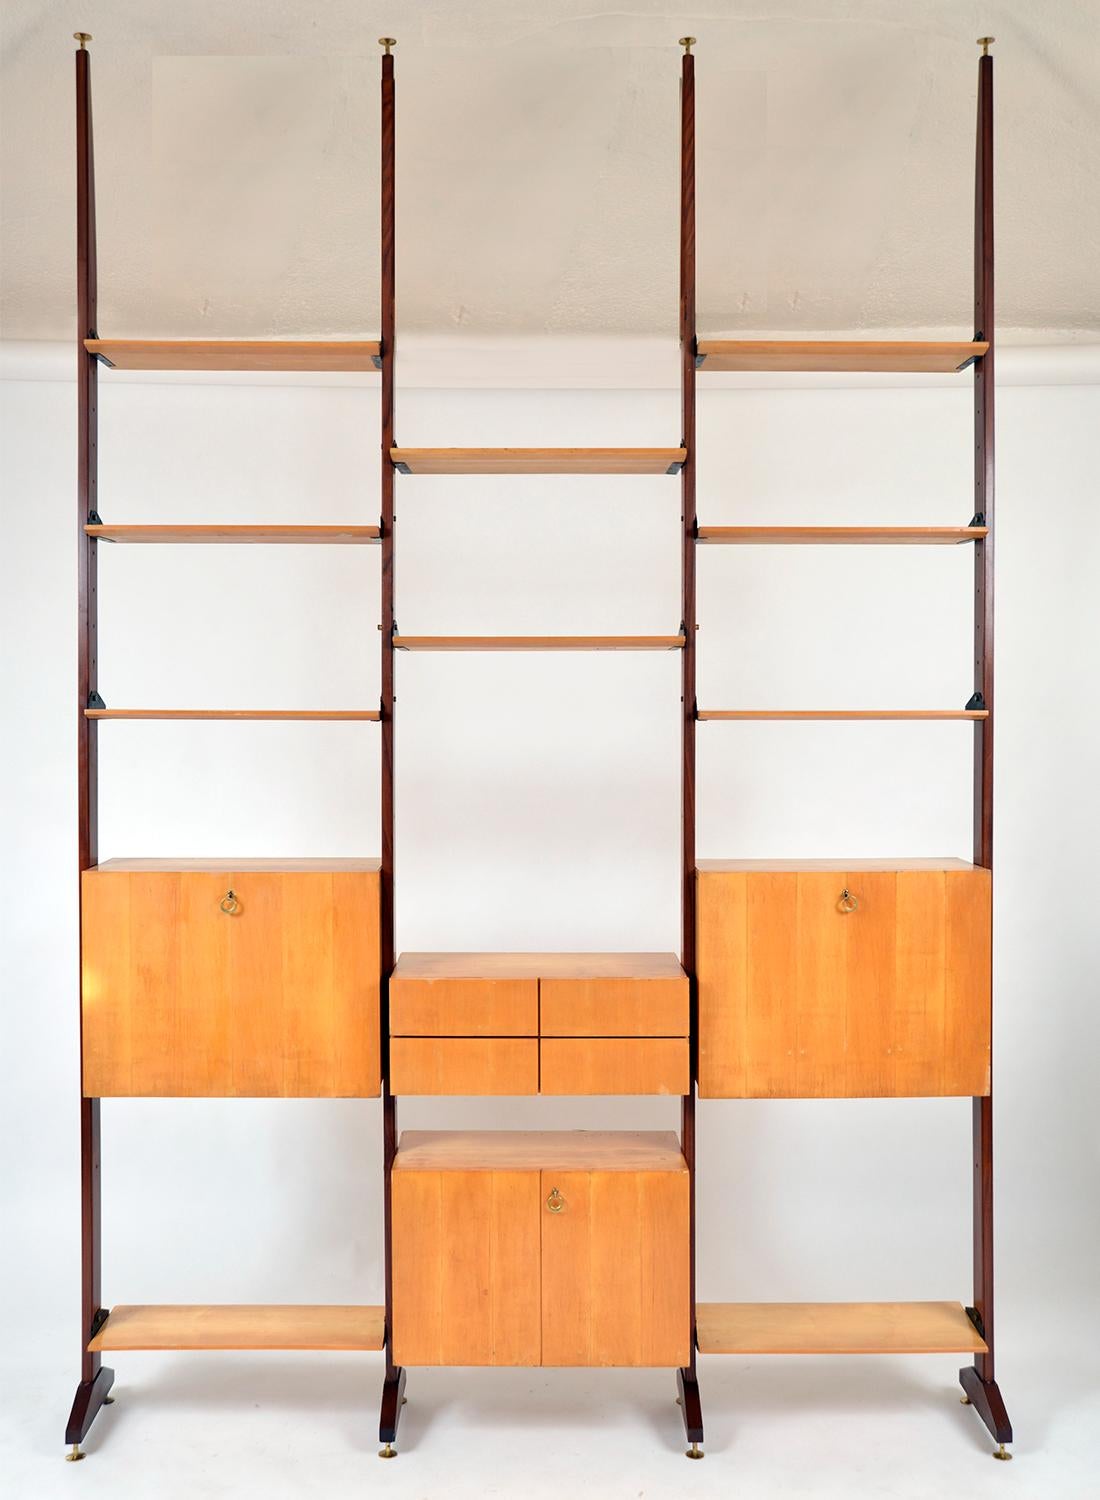 Recently imported from Italy, this is a good example of post war Italian Avant Garde design. Measuring an impressive 3-metres from floor to ceiling – a common height in Italian apartments – with opportunity to arrange the shelves to suit. 
This